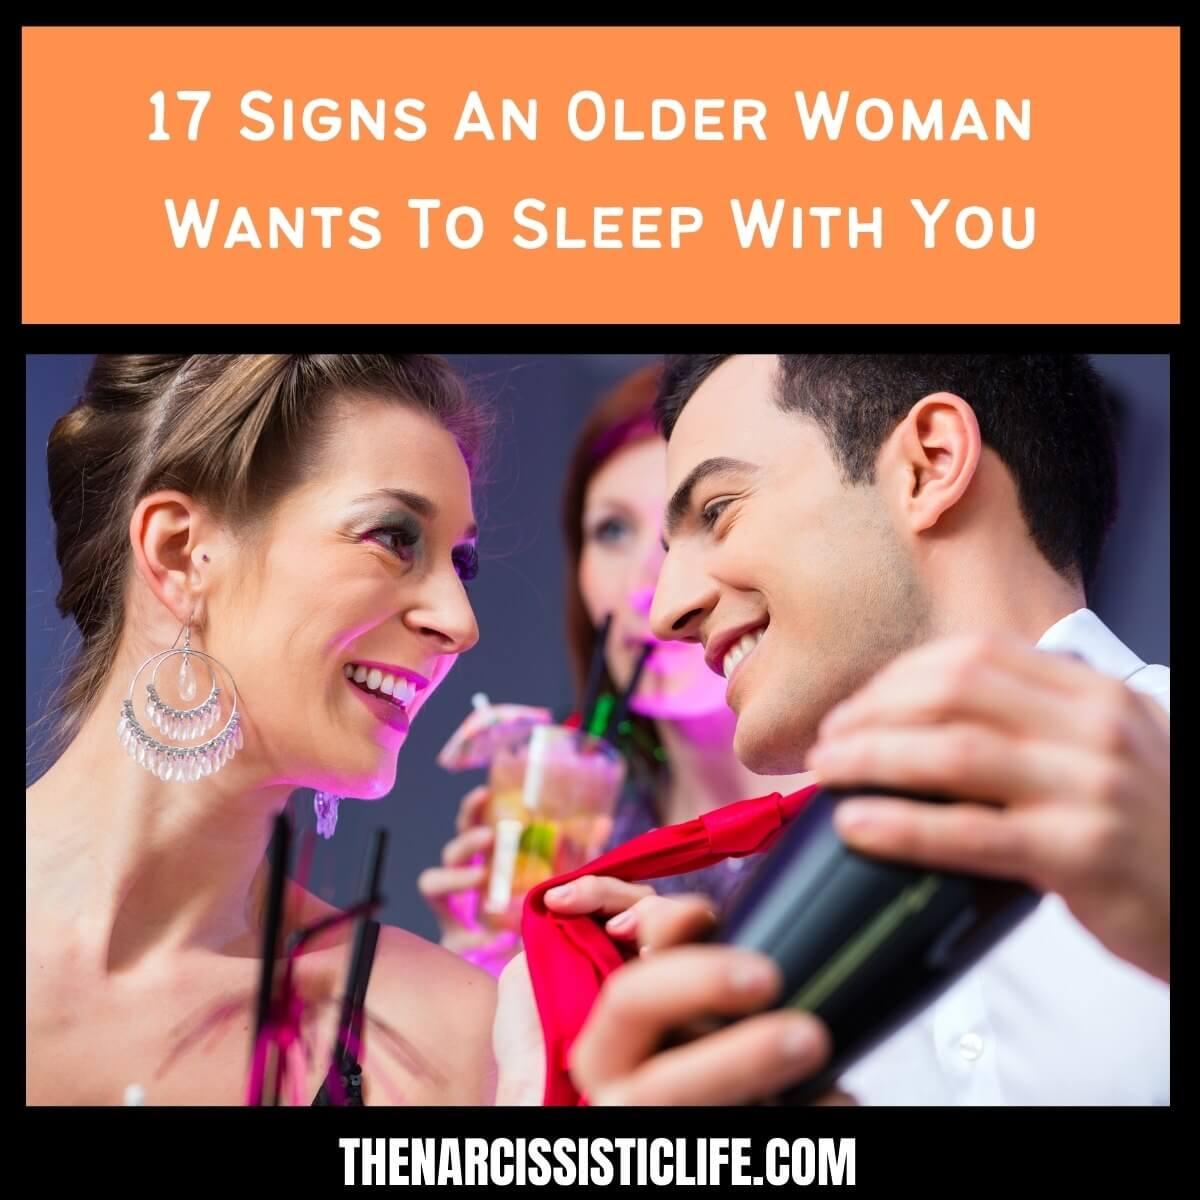 17 Signs An Older Woman Wants To Sleep With You